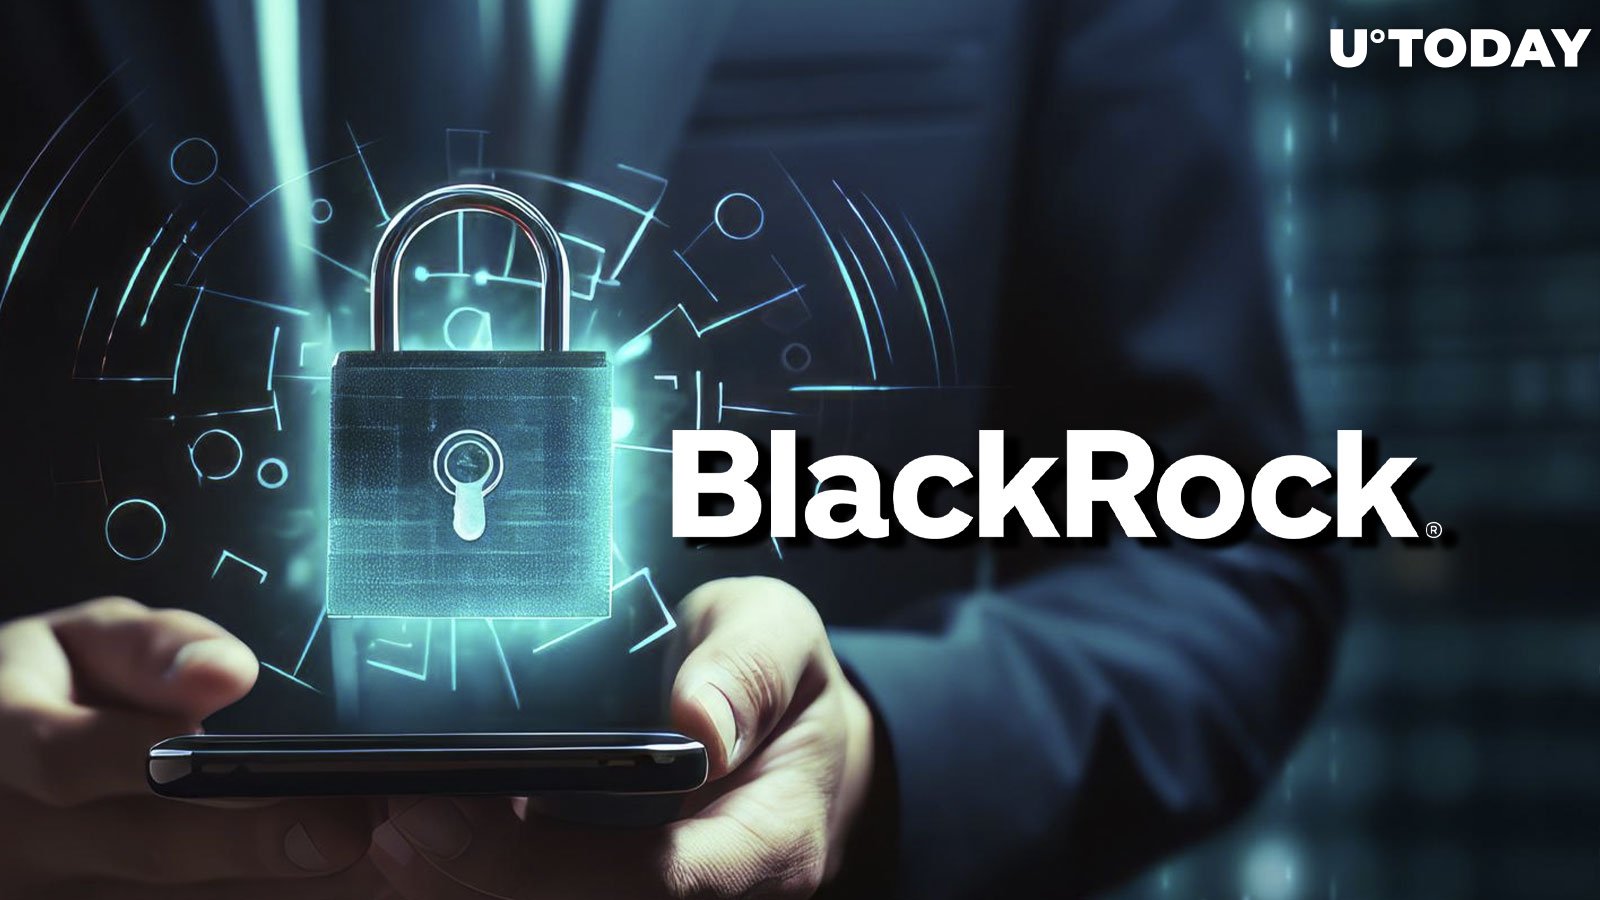 BlackRock Leads Funding Round for Securitize with Focus on Tokenization